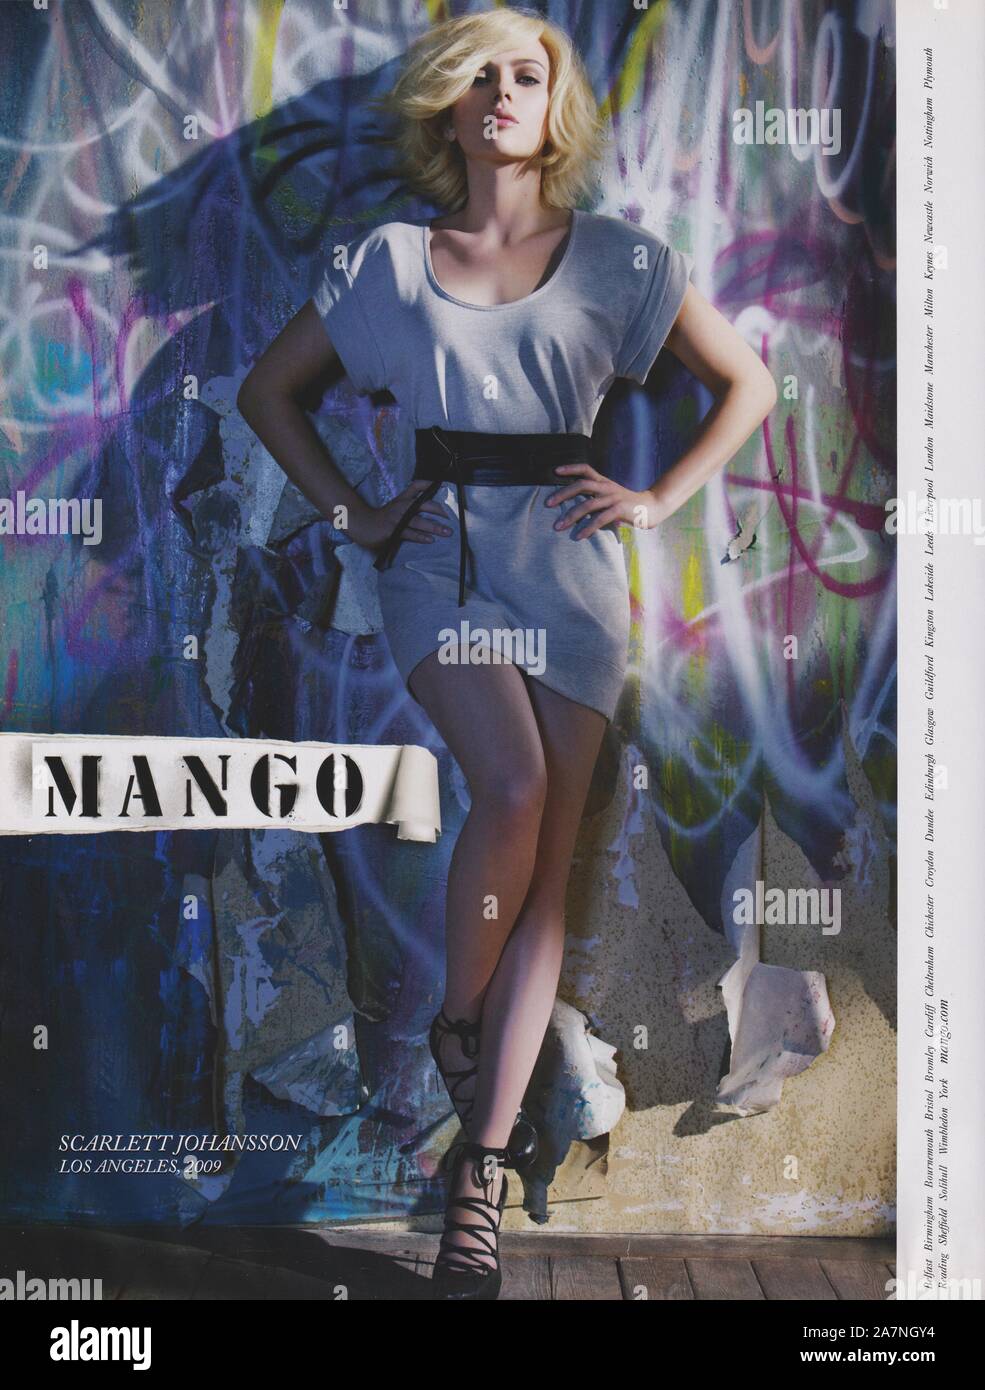 poster advertising MANGO fashion house with Scarlett Johansson actress in  paper magazine from 2009, advertisement, creative MANGO advert from 2000s  Stock Photo - Alamy